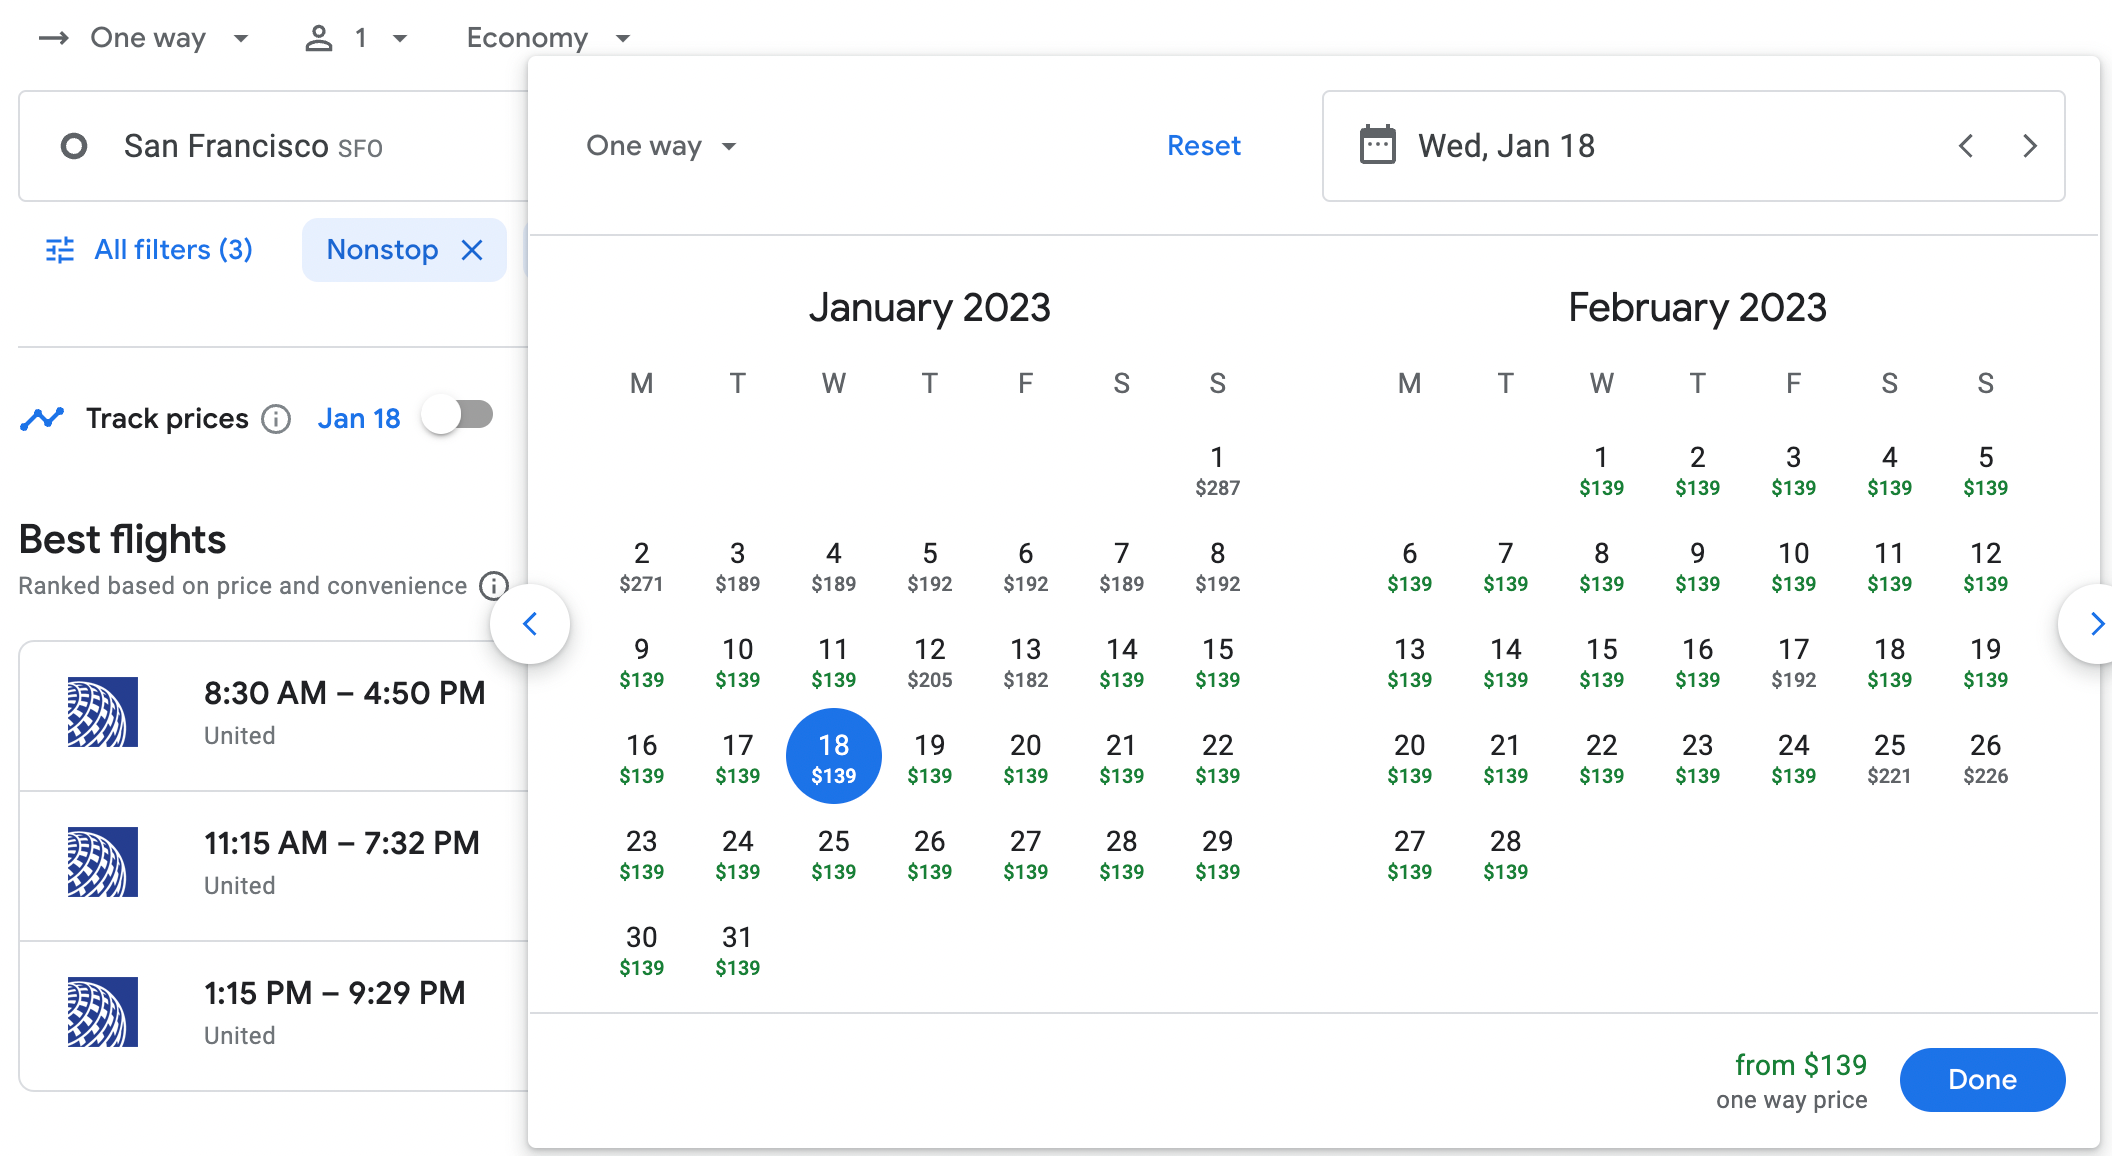 Using Google Flights to book a nonstop from SFO to EWR on United